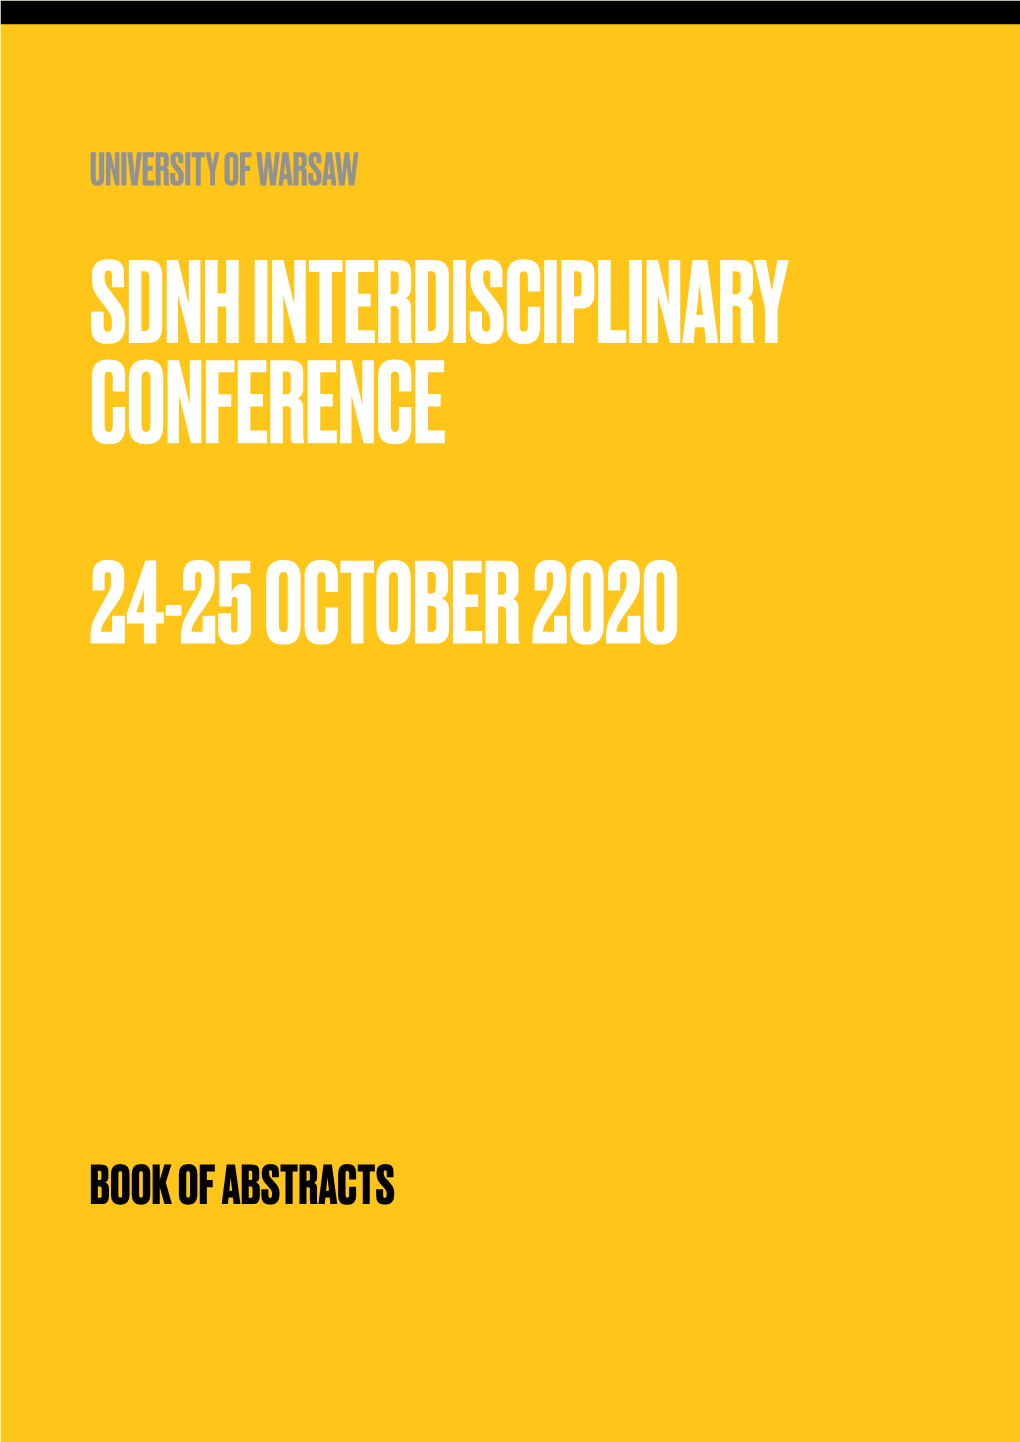 Book of Abstracts / SDNH Interdisciplinary Conference 2020